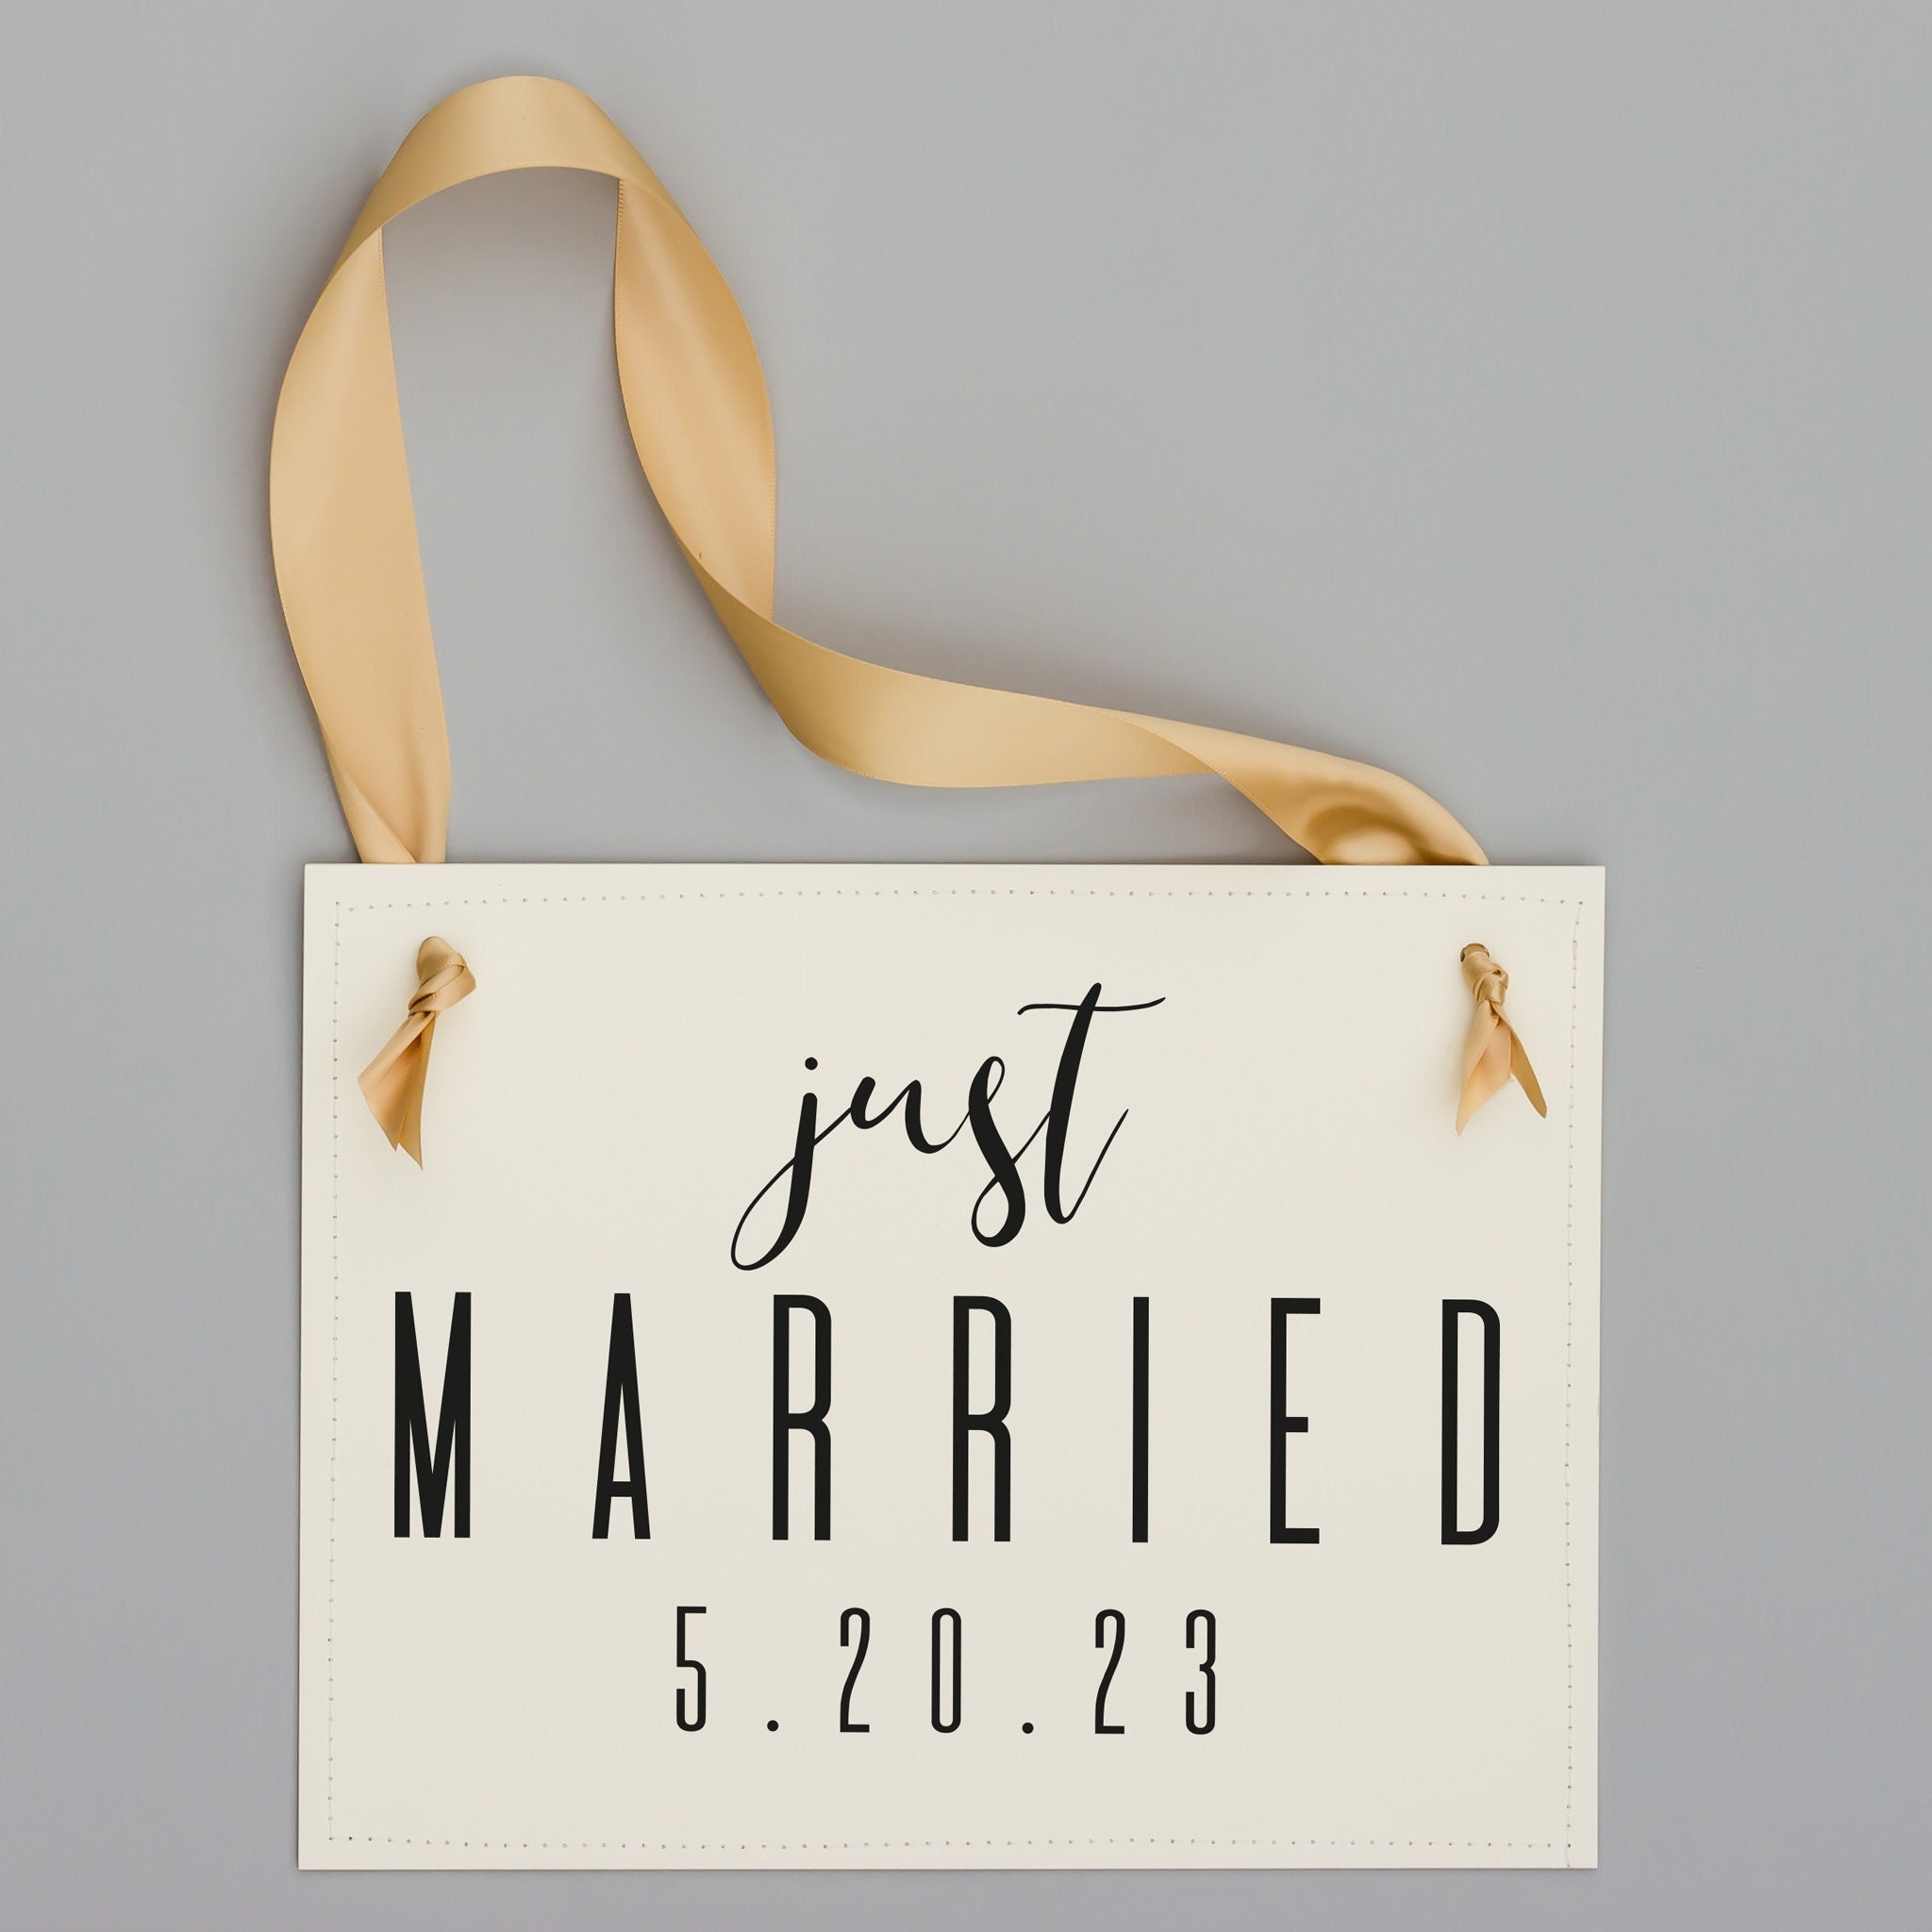 Printable Just Married Banner, Instant Download Wedding Send off Garland,  Diy Hitched Car Decorations, Digital Bride and Groom Photo Props 